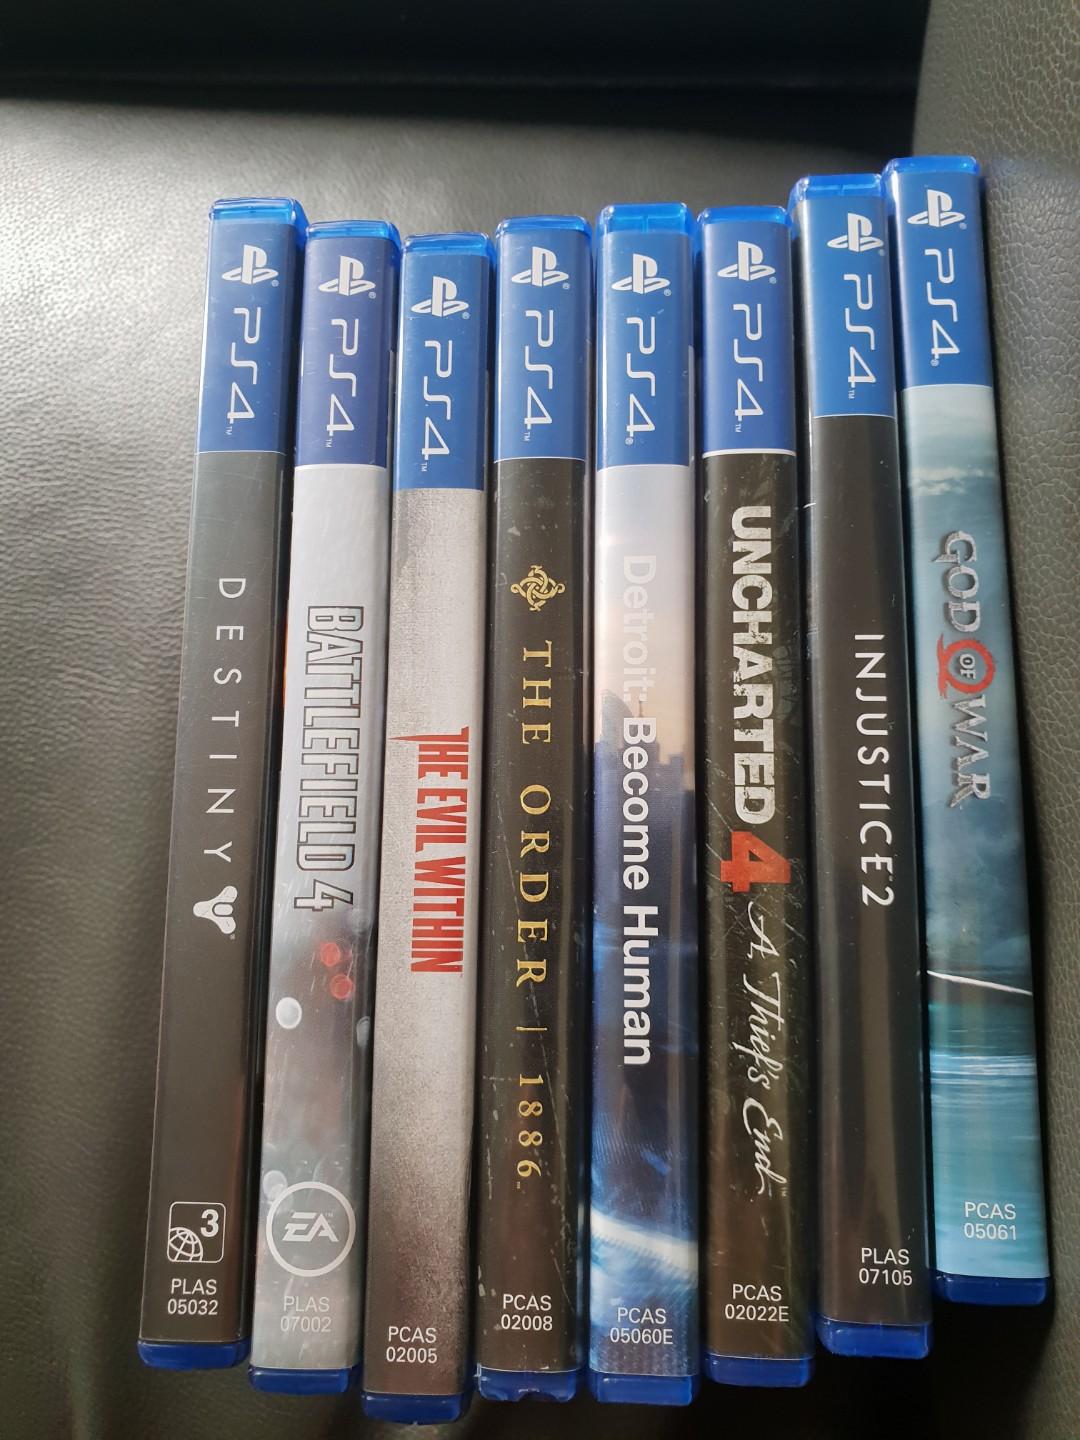 ps4 games that are popular